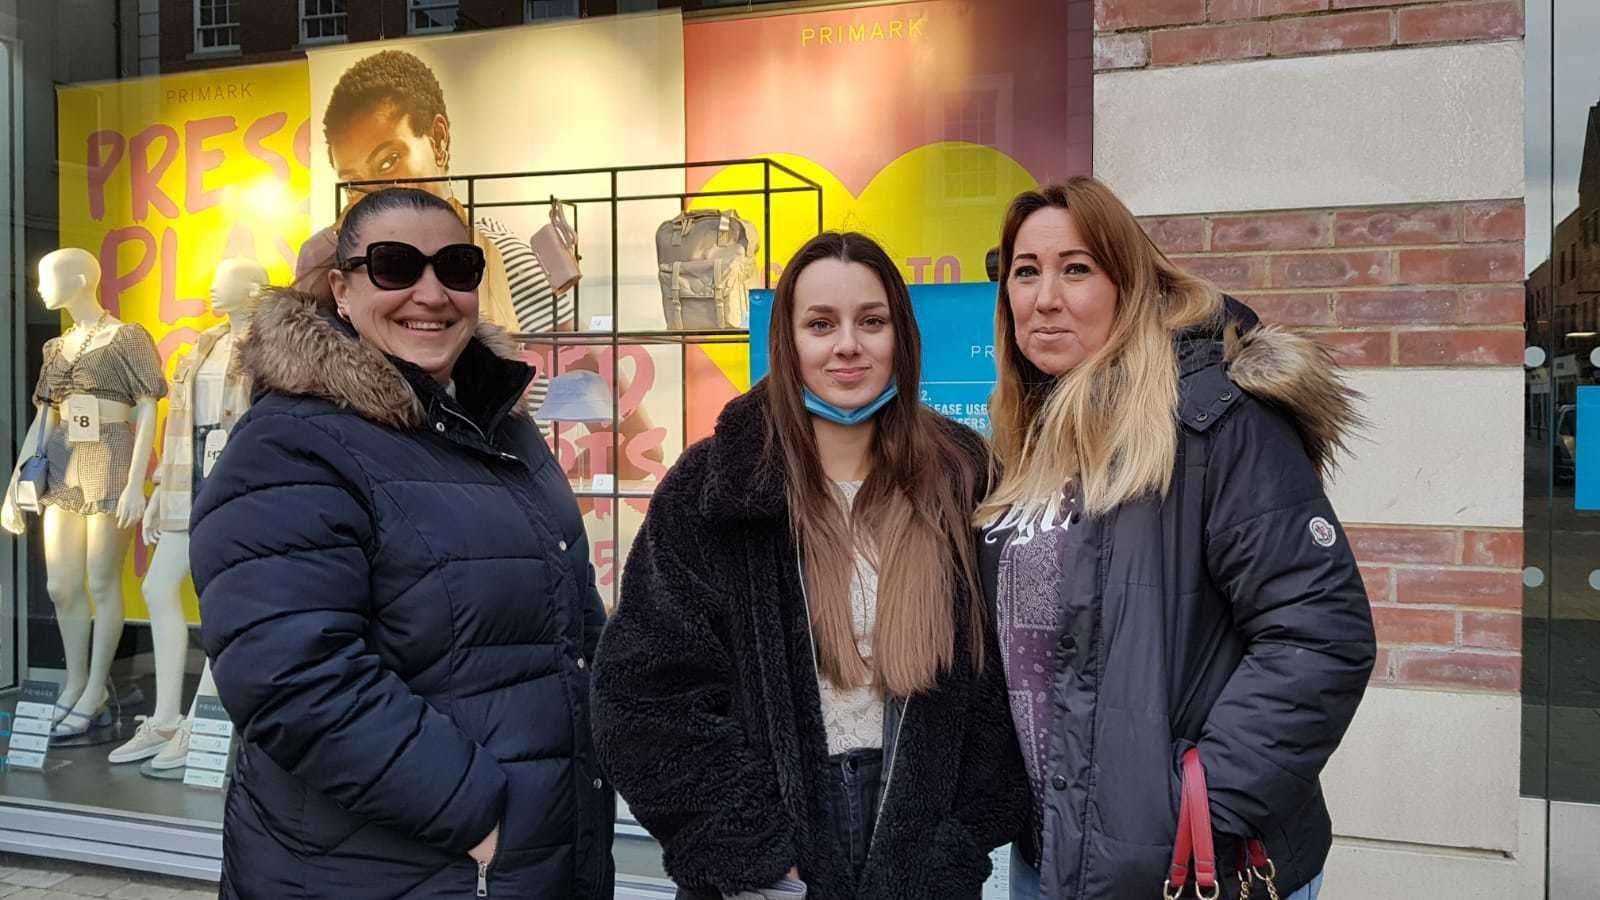 Danielle Collier, Madi Furner and Tammy Furner outside Primark in Canterbury